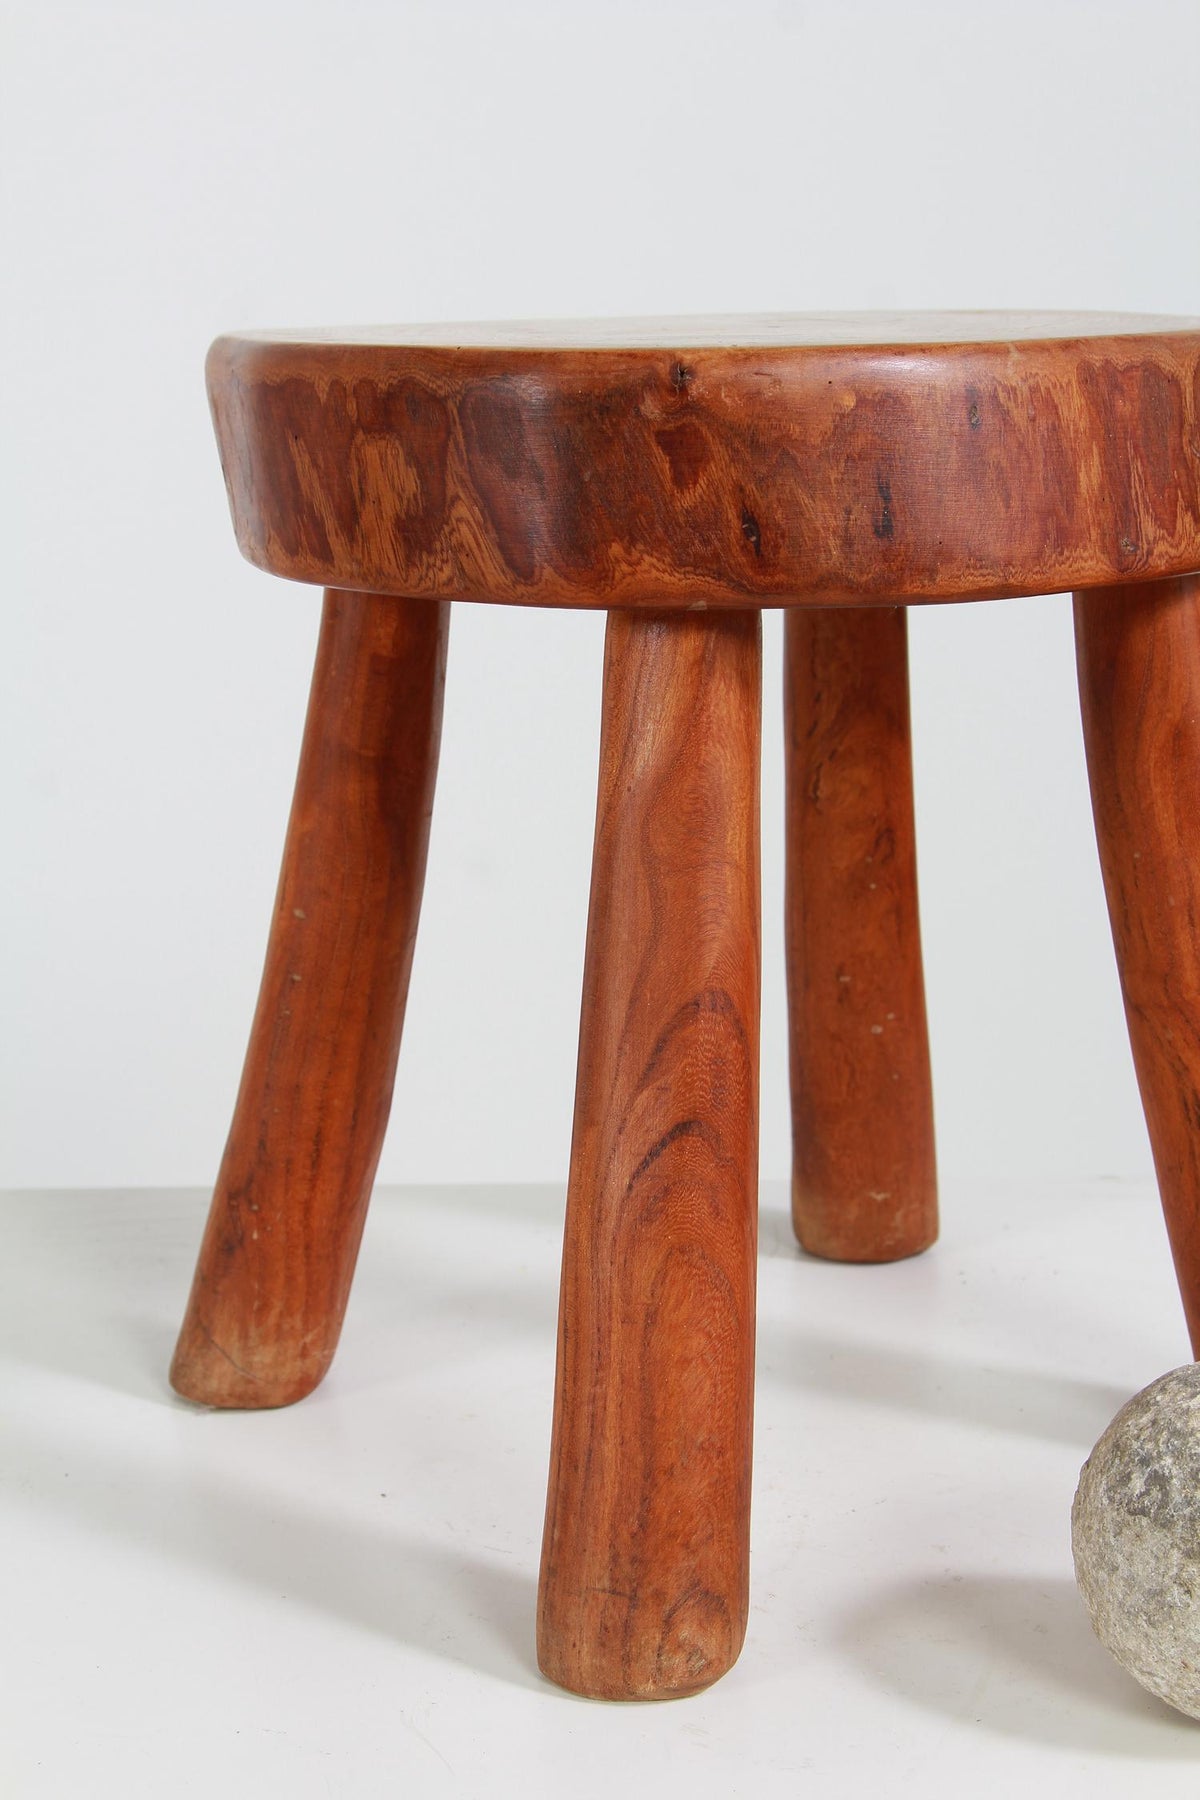 MID-CENTURY MODERN WOODEN STOOL IN THE STYLE OF CHARLOTTE PERRIAND